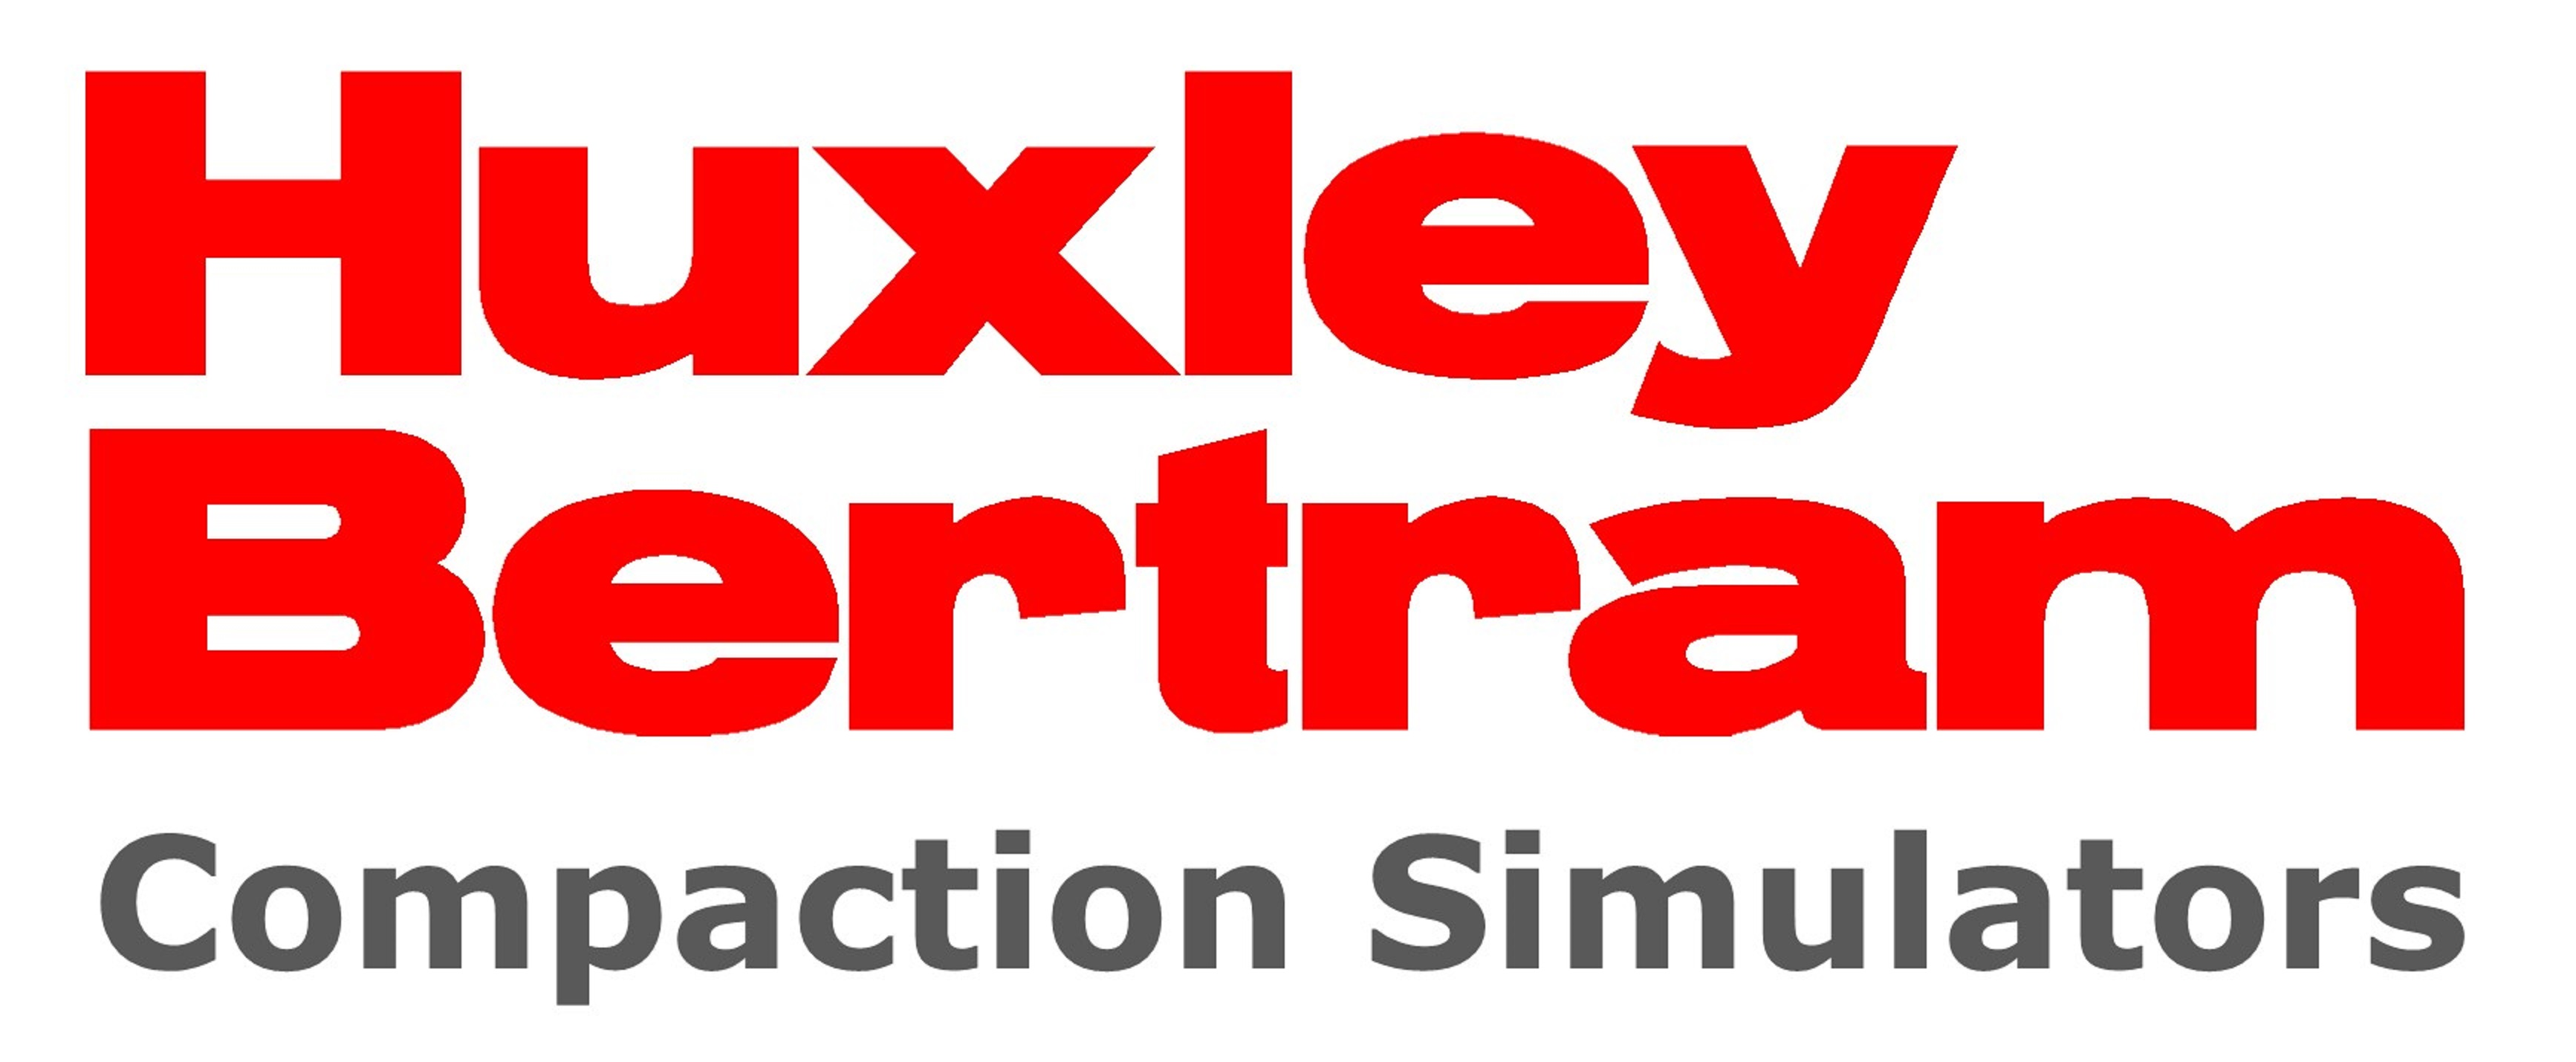 Huxley Bertram partners with CMAC research hub to provide leading-edge Compaction Simulation Test Facility